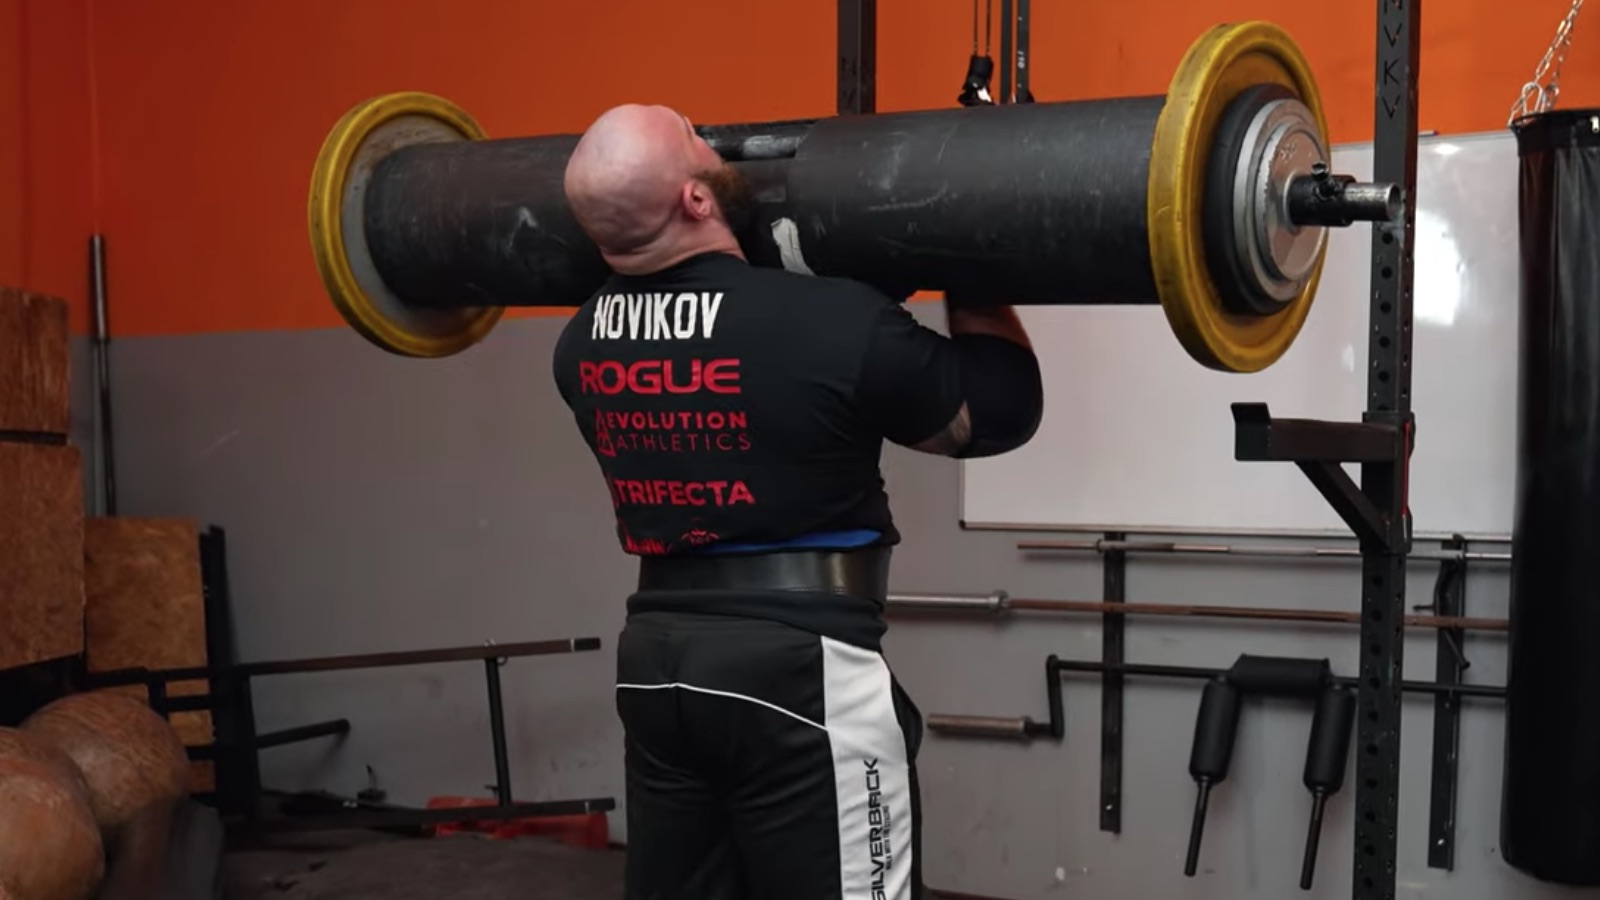 Tied as Youngest World's Strongest Man, Oleksii Novikov Could Dominate the  Future